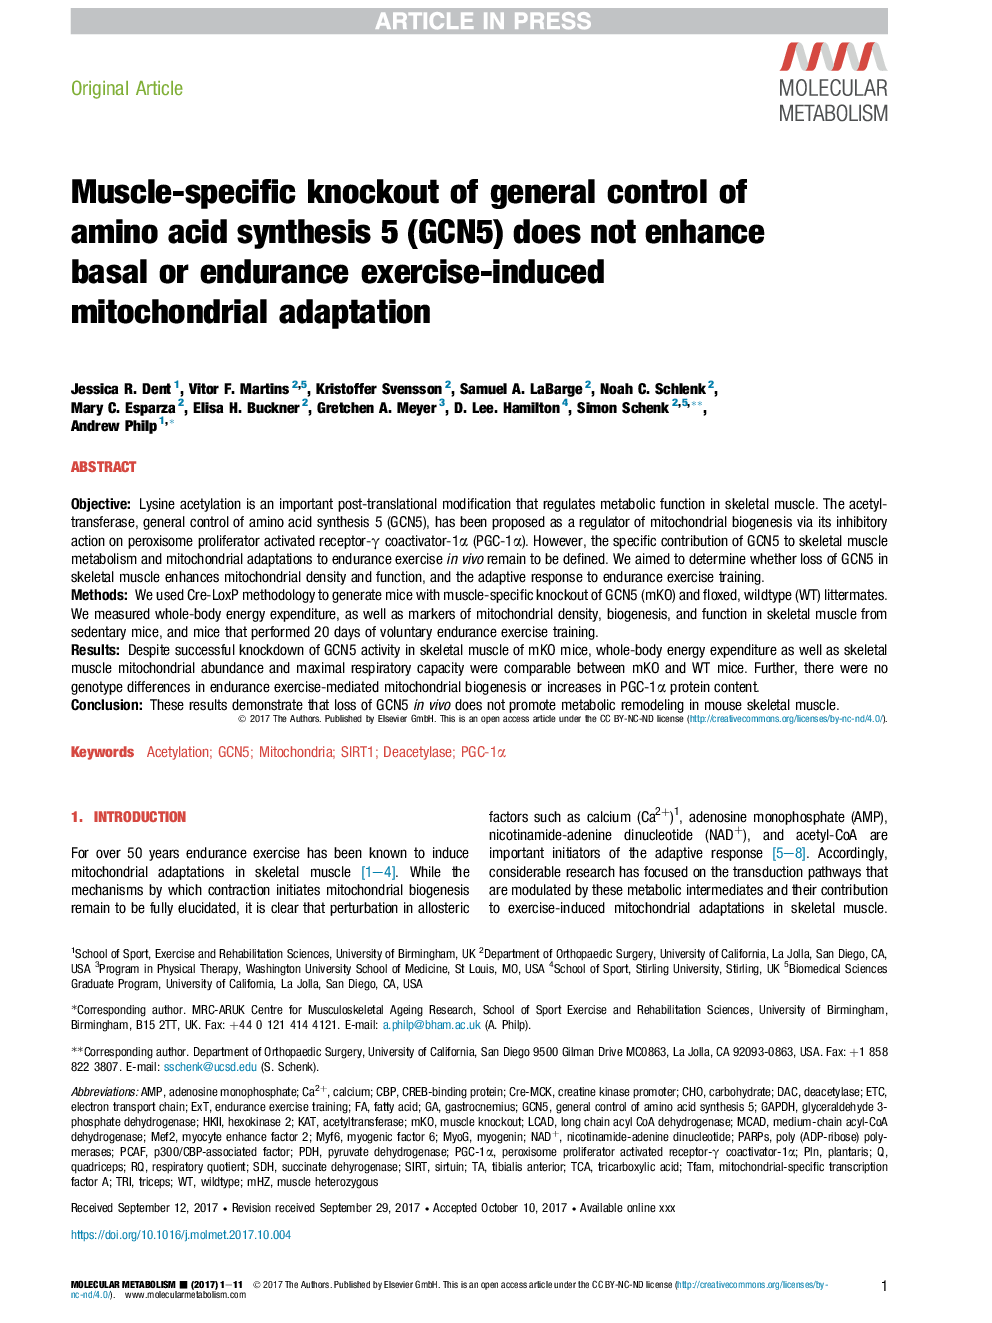 Muscle-specific knockout of general control of amino acid synthesis 5 (GCN5) does not enhance basal or endurance exercise-induced mitochondrial adaptation